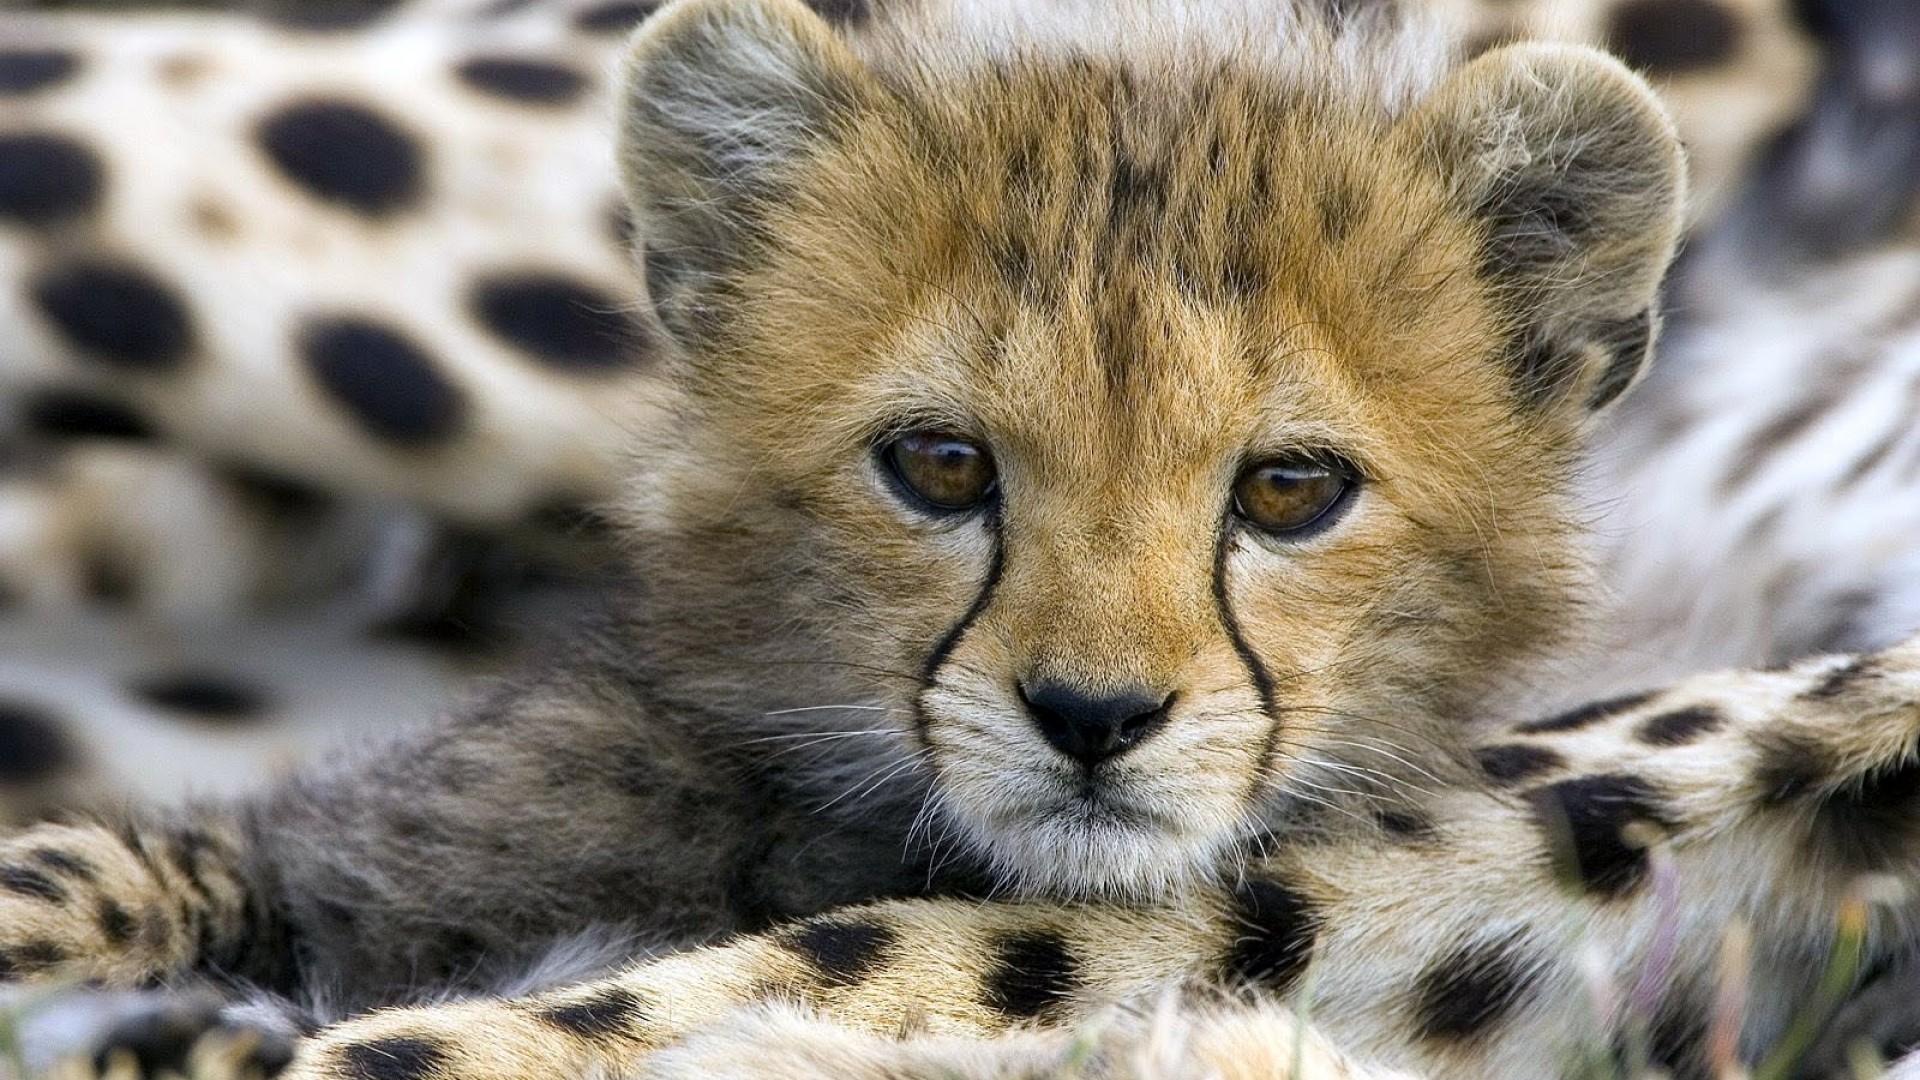 Cute Cheetah Baby Desktop Wallpaper And Make This For Your